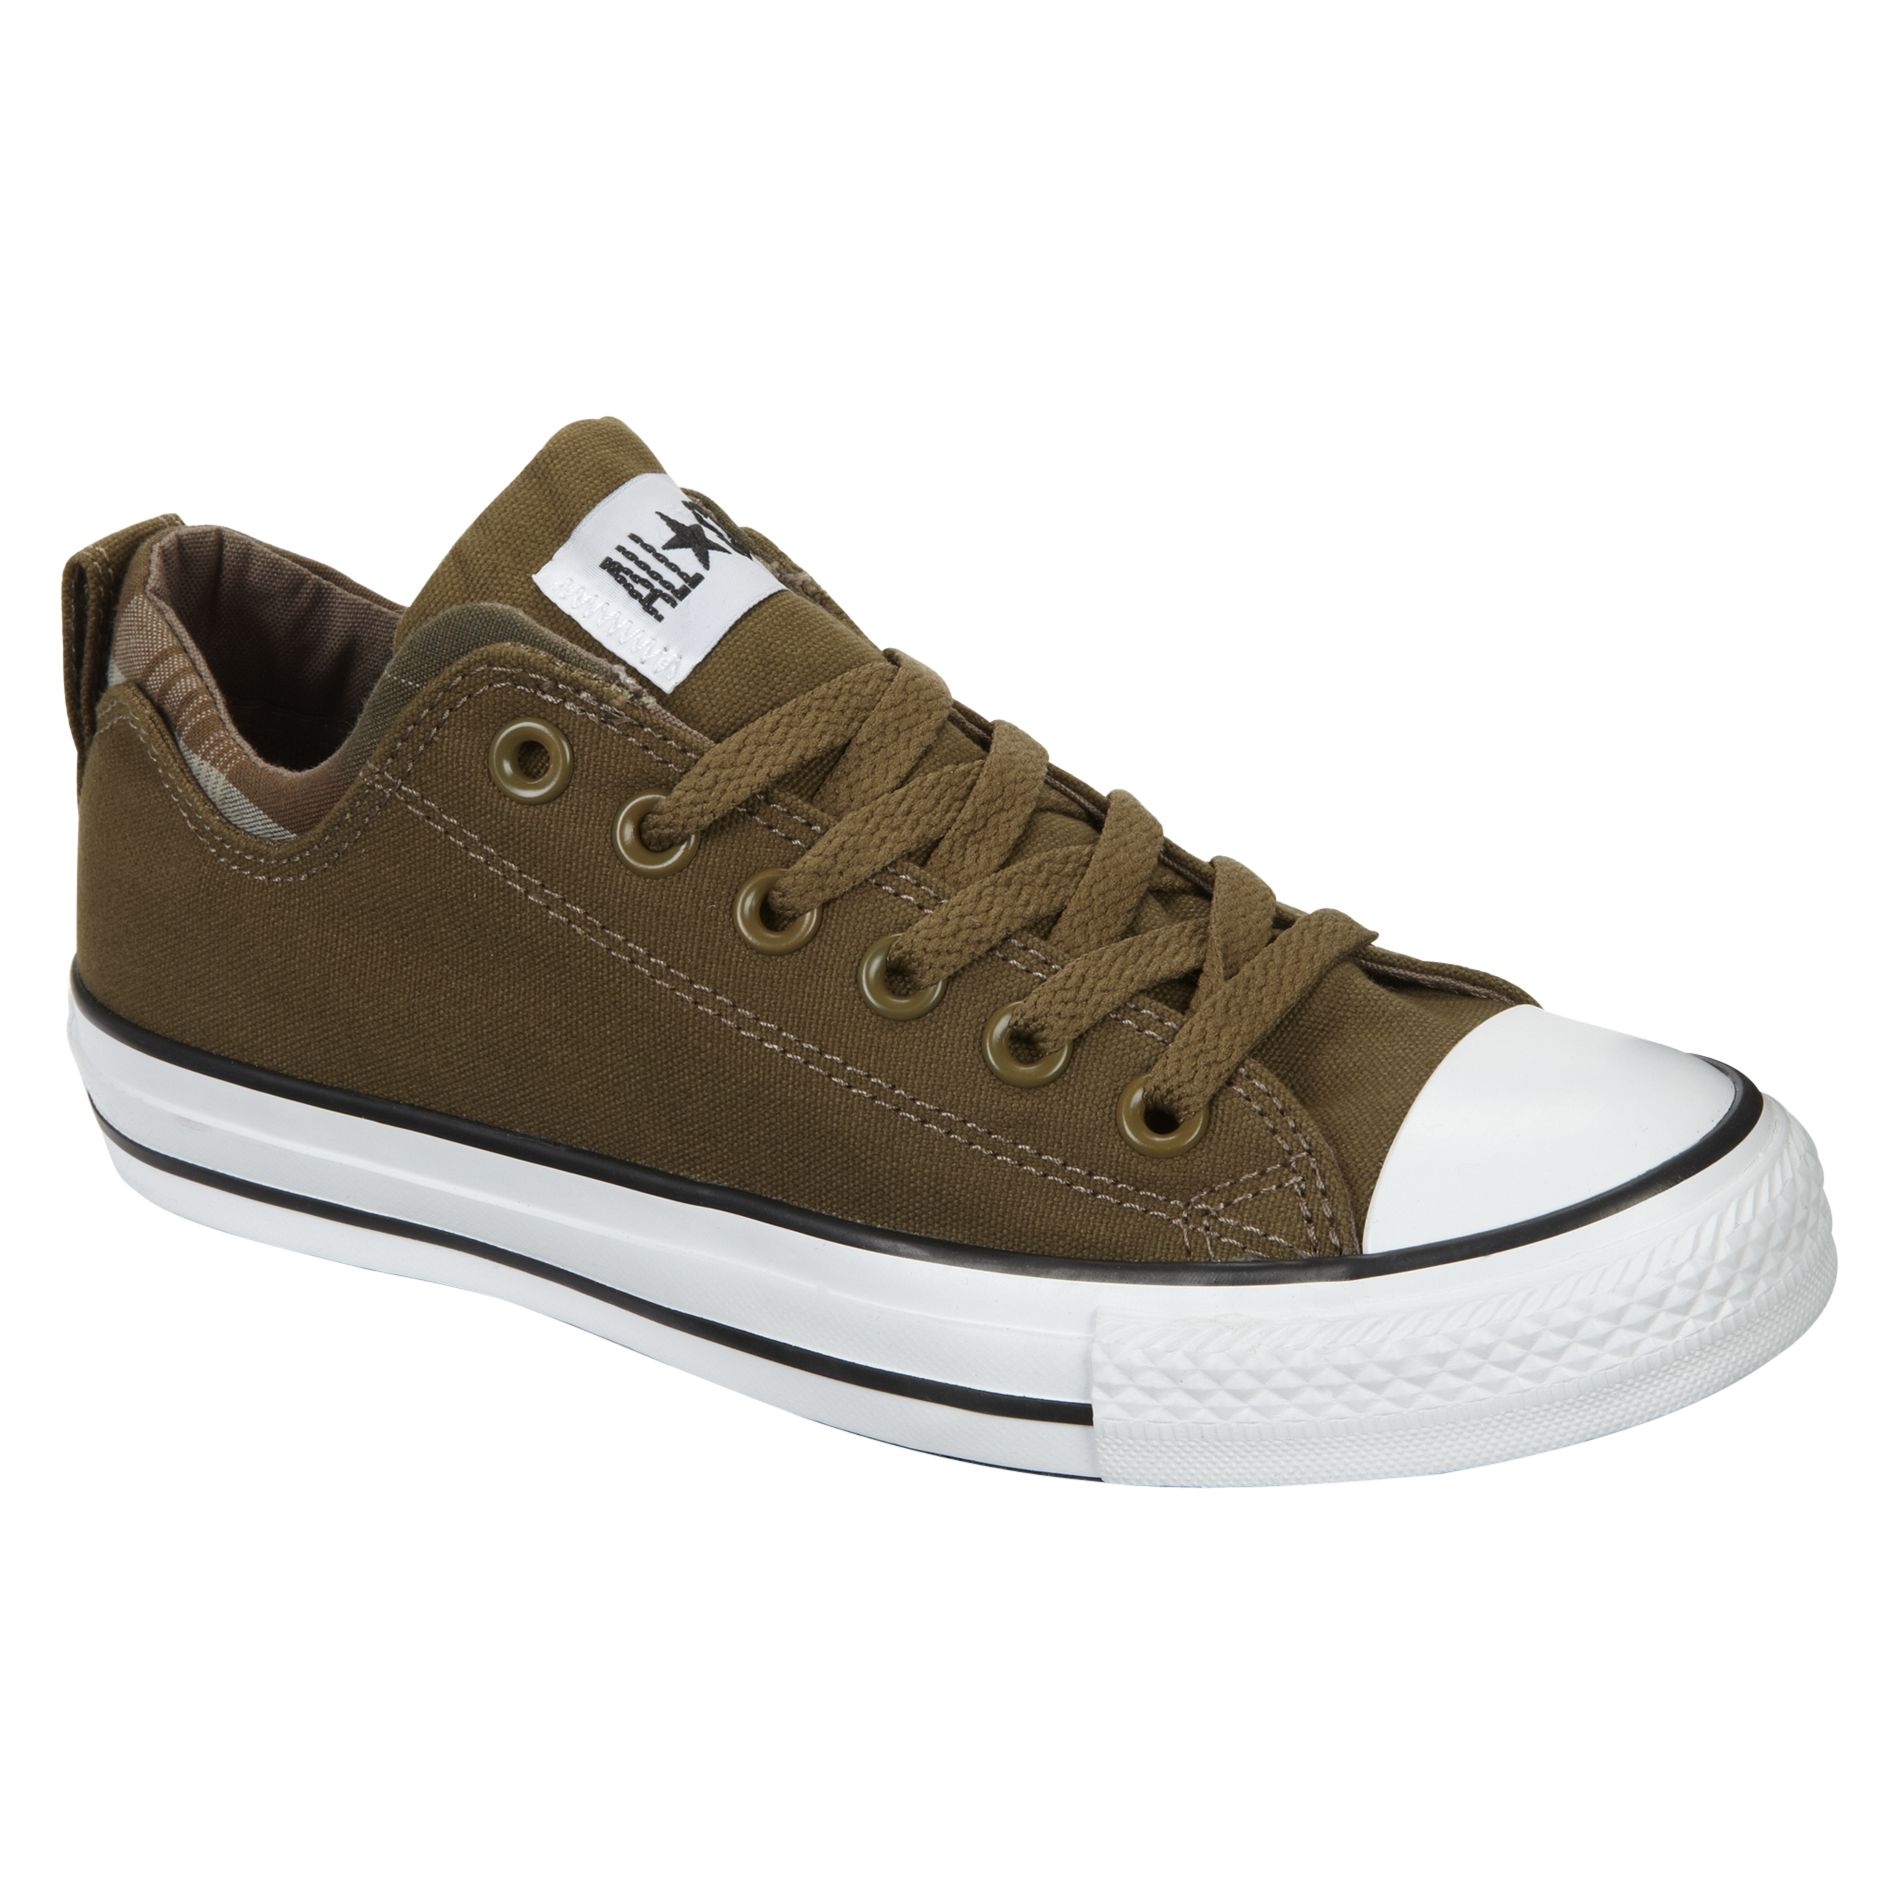 Converse Unisex Chuck Taylor All Star Oxford Shoe - Olive Green